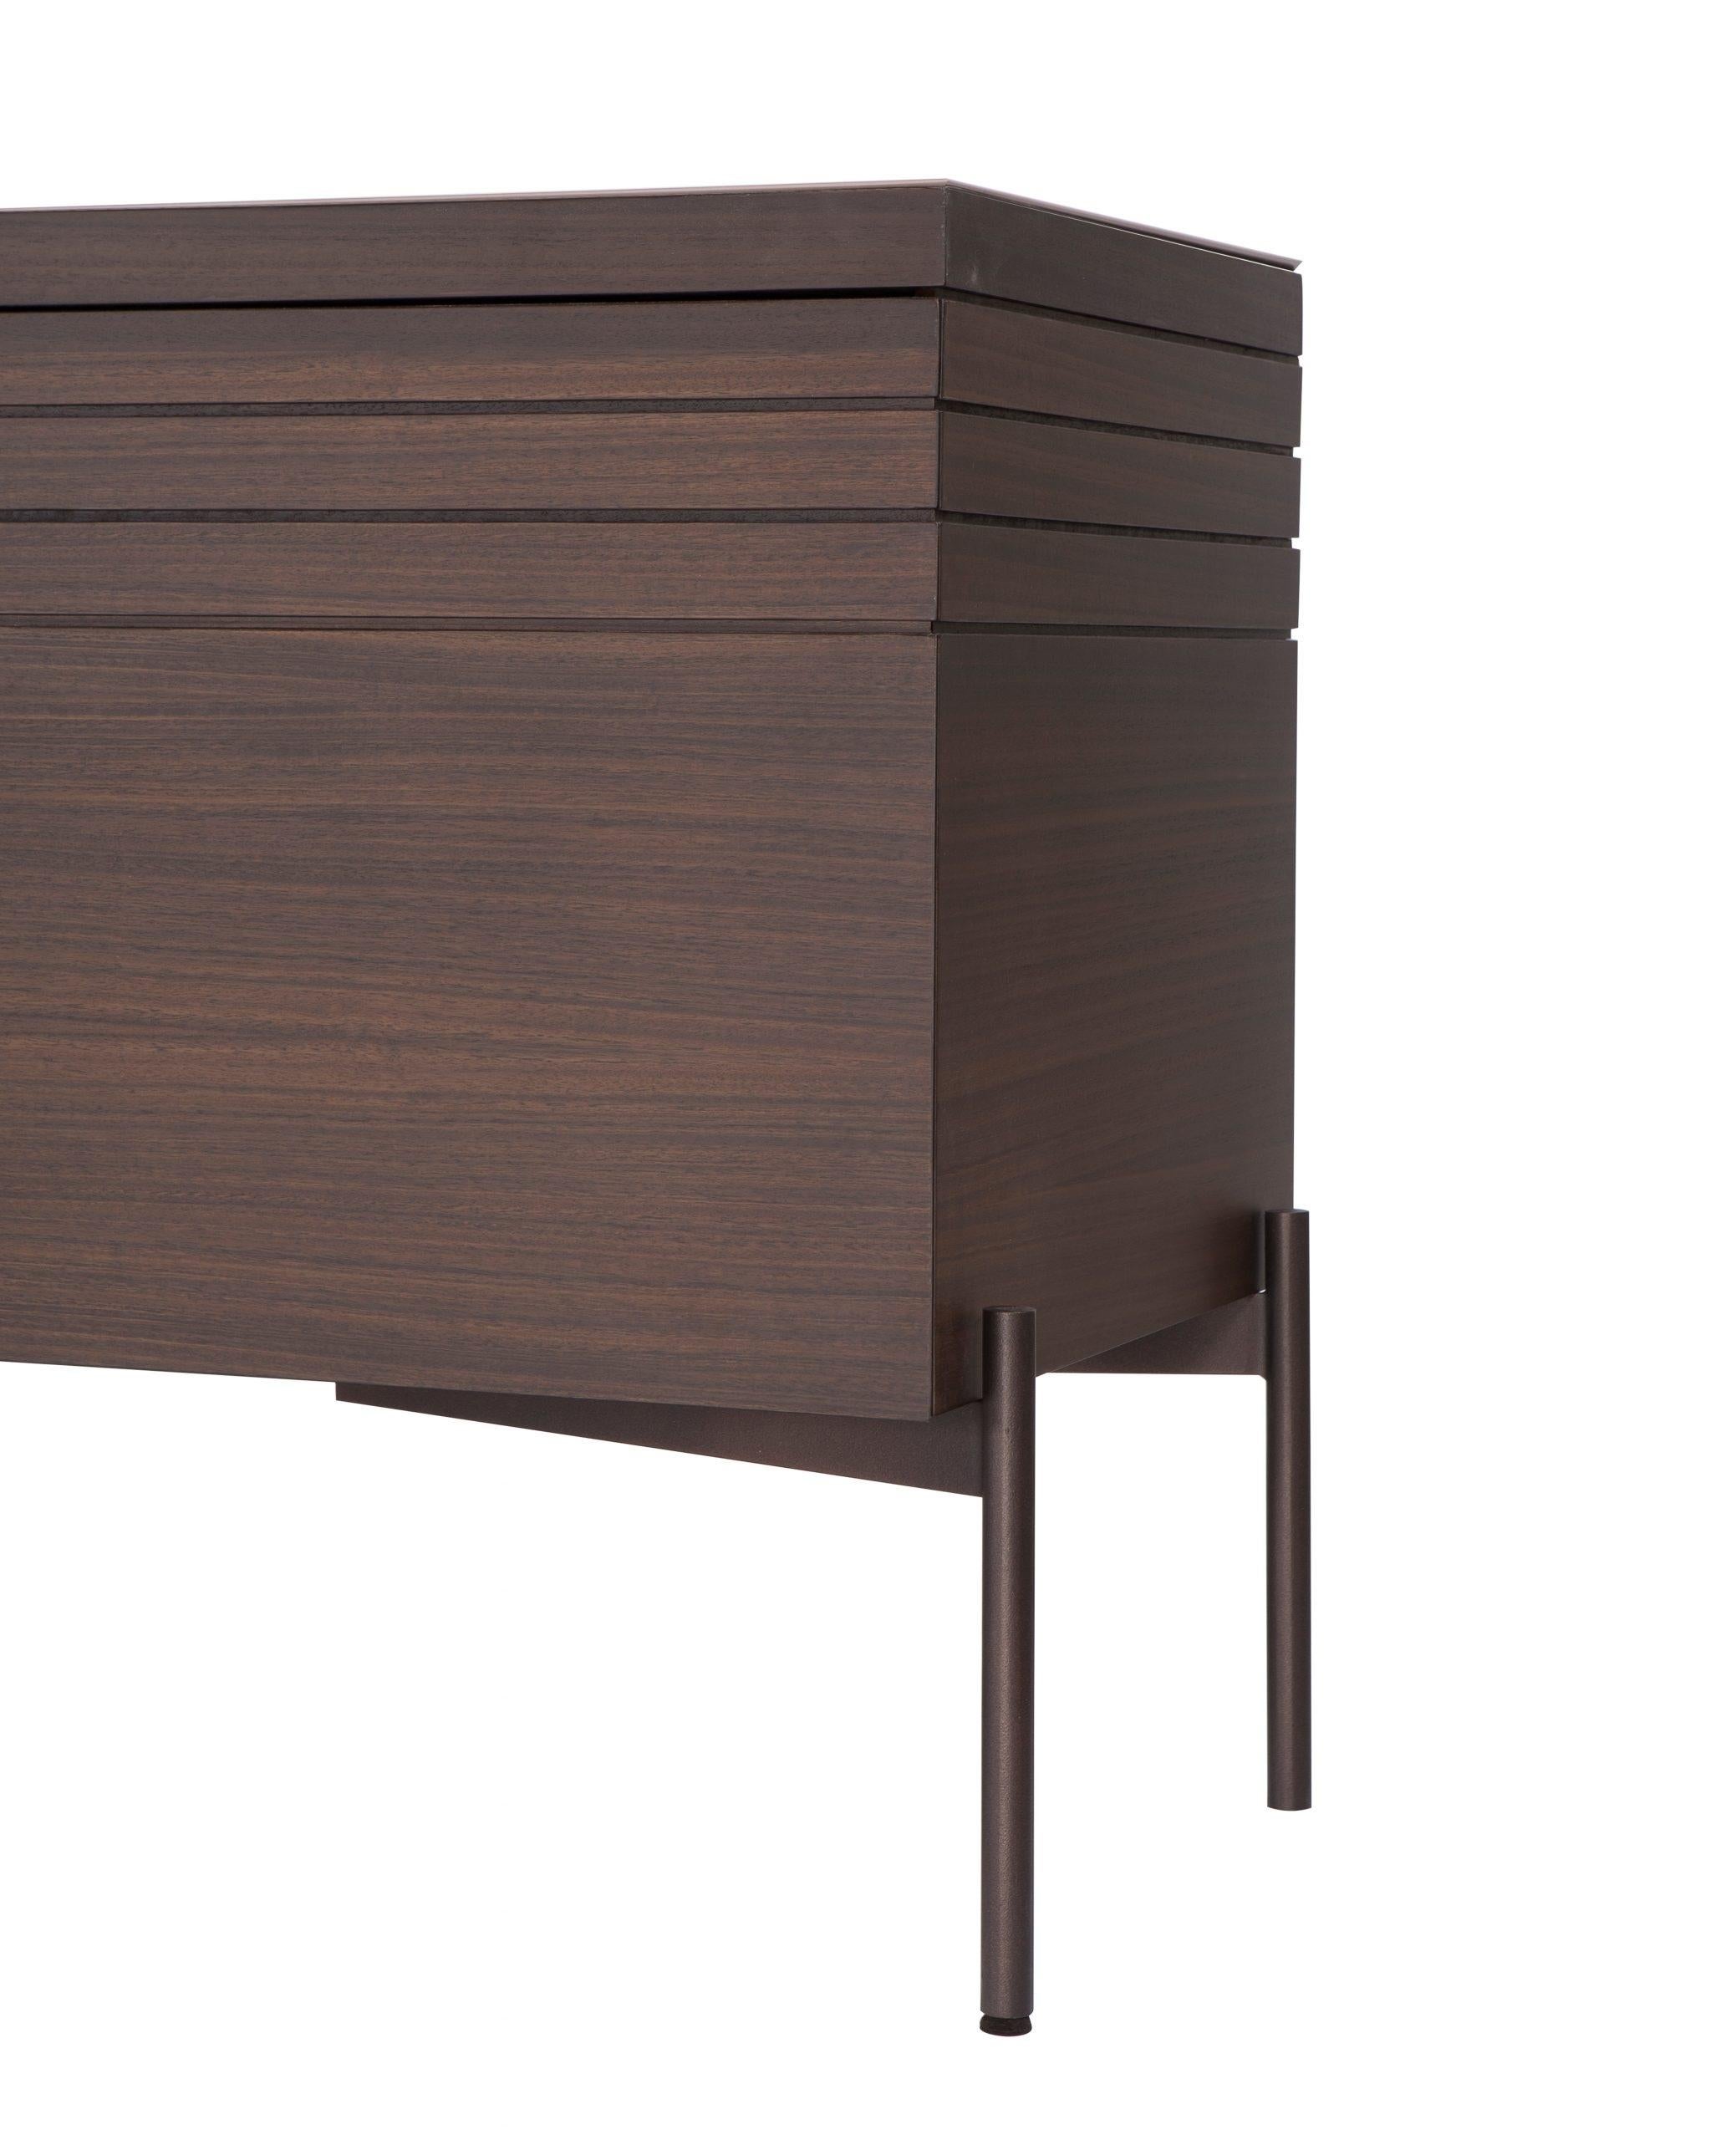 Wood Contemporary Sideboard In Walnut. For Sale